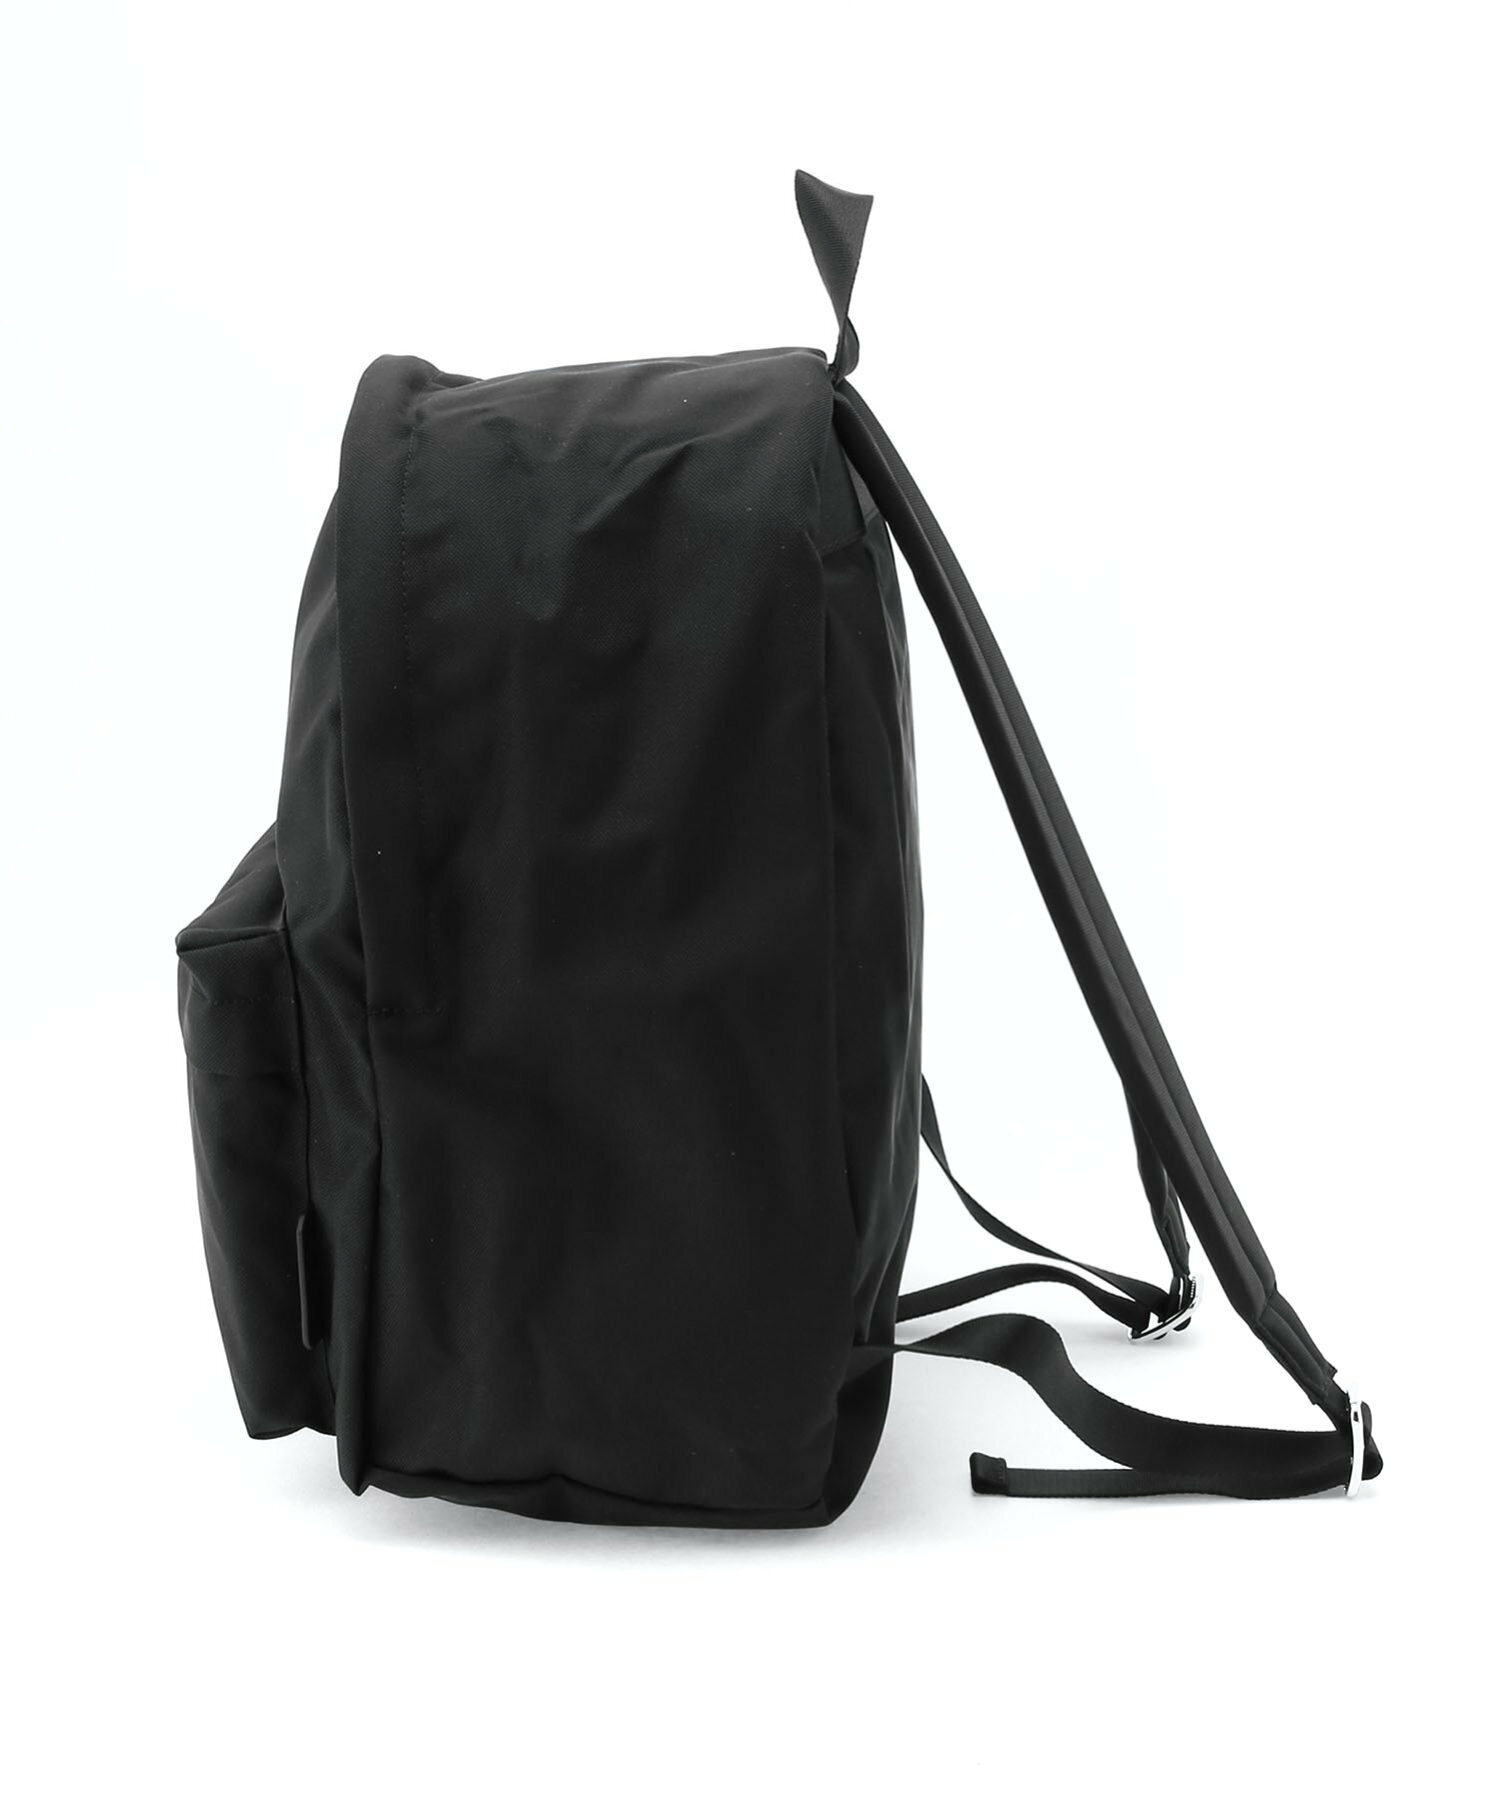 LIVE FREE The Deconstructed BackPack